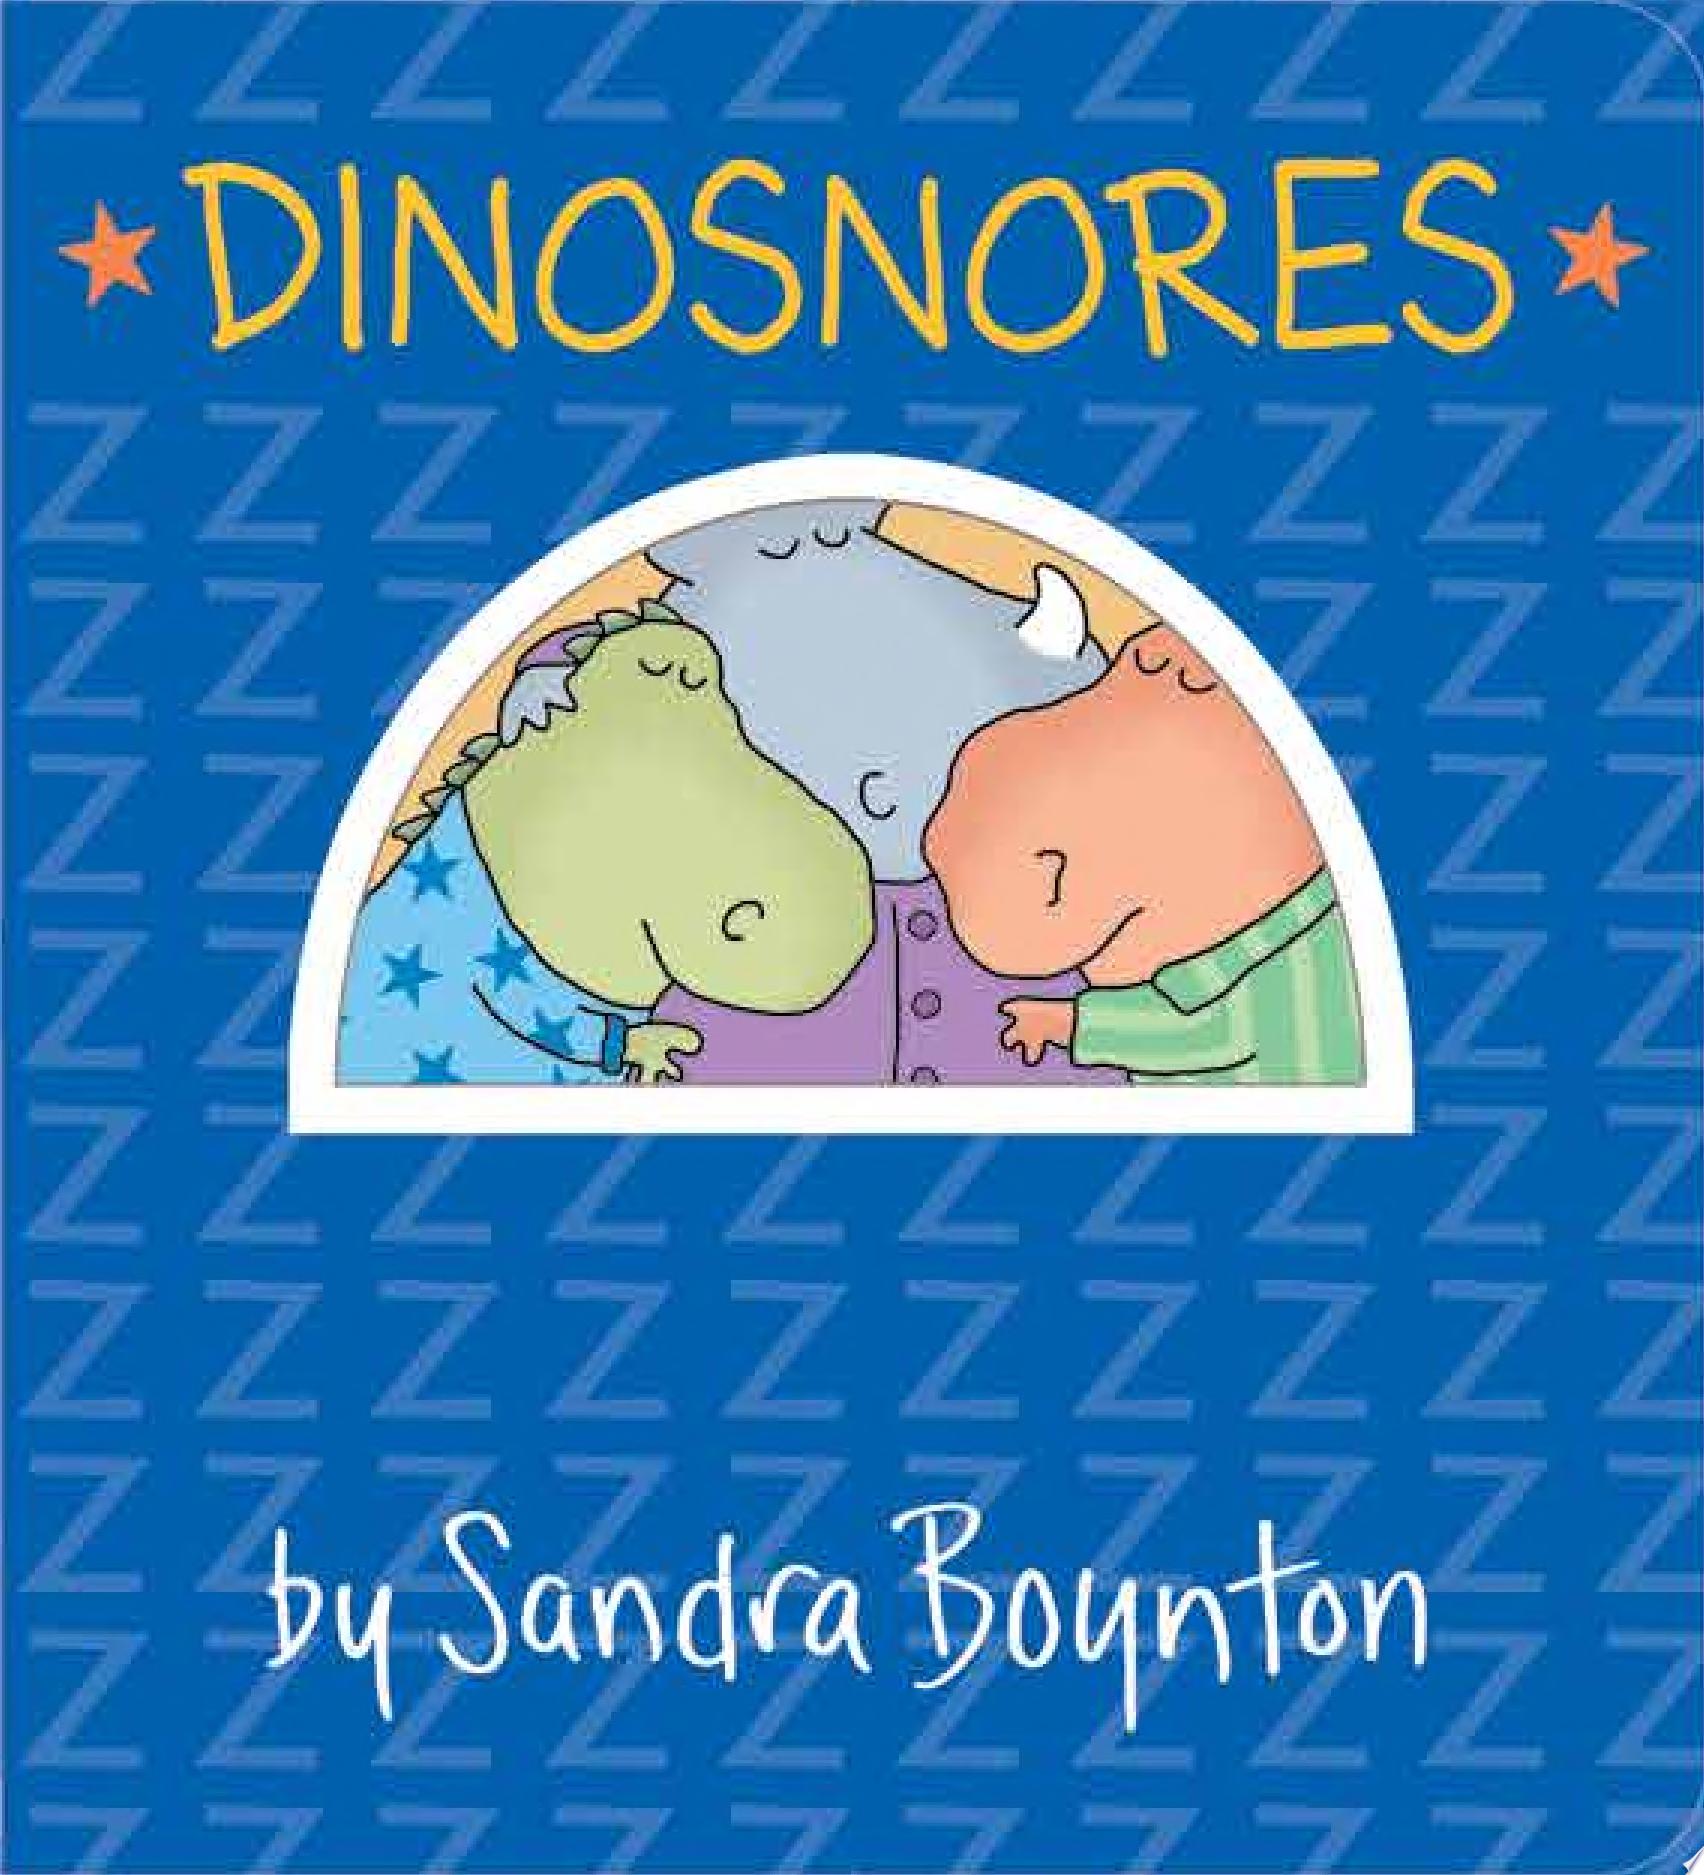 Image for "Dinosnores"